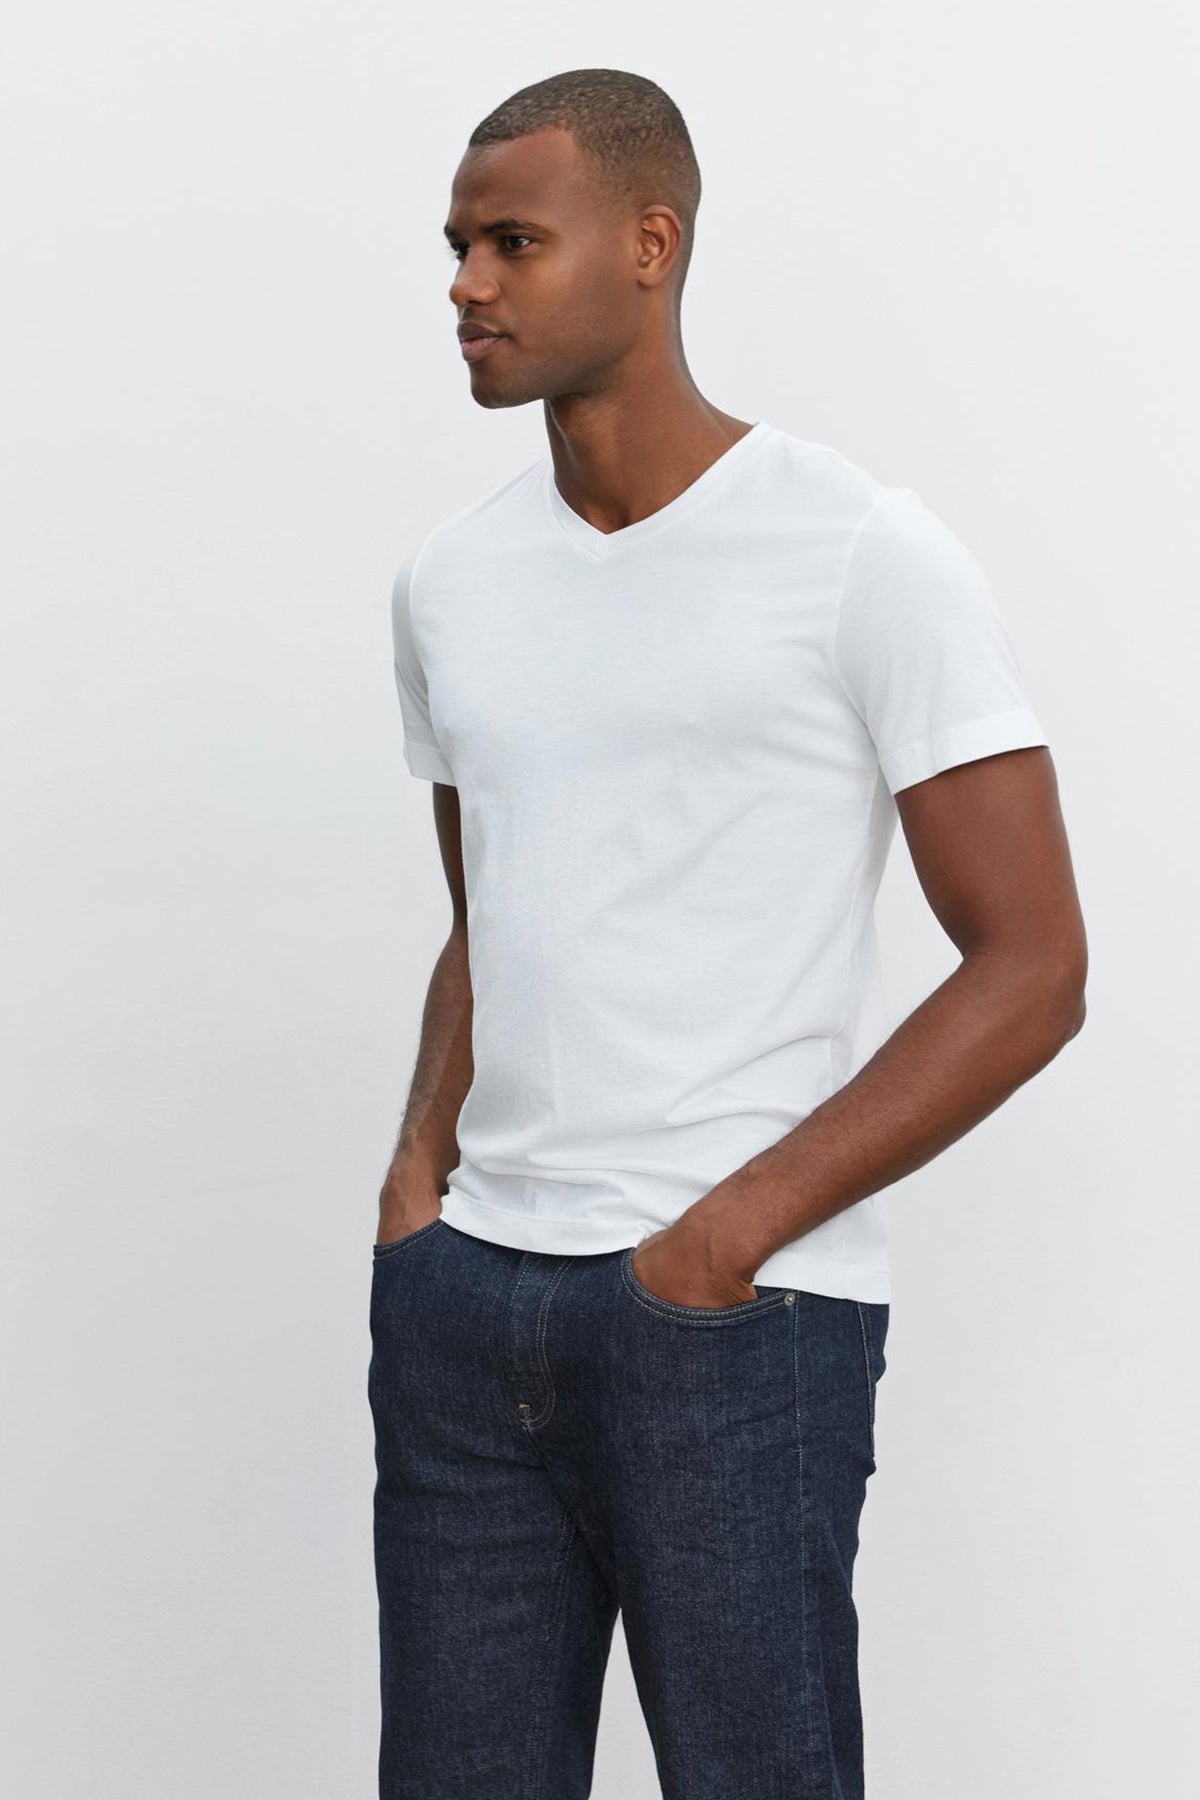   A man wearing a Velvet by Graham & Spencer SAMSEN WHISPER CLASSIC V-NECK TEE and jeans with a utility silhouette. 